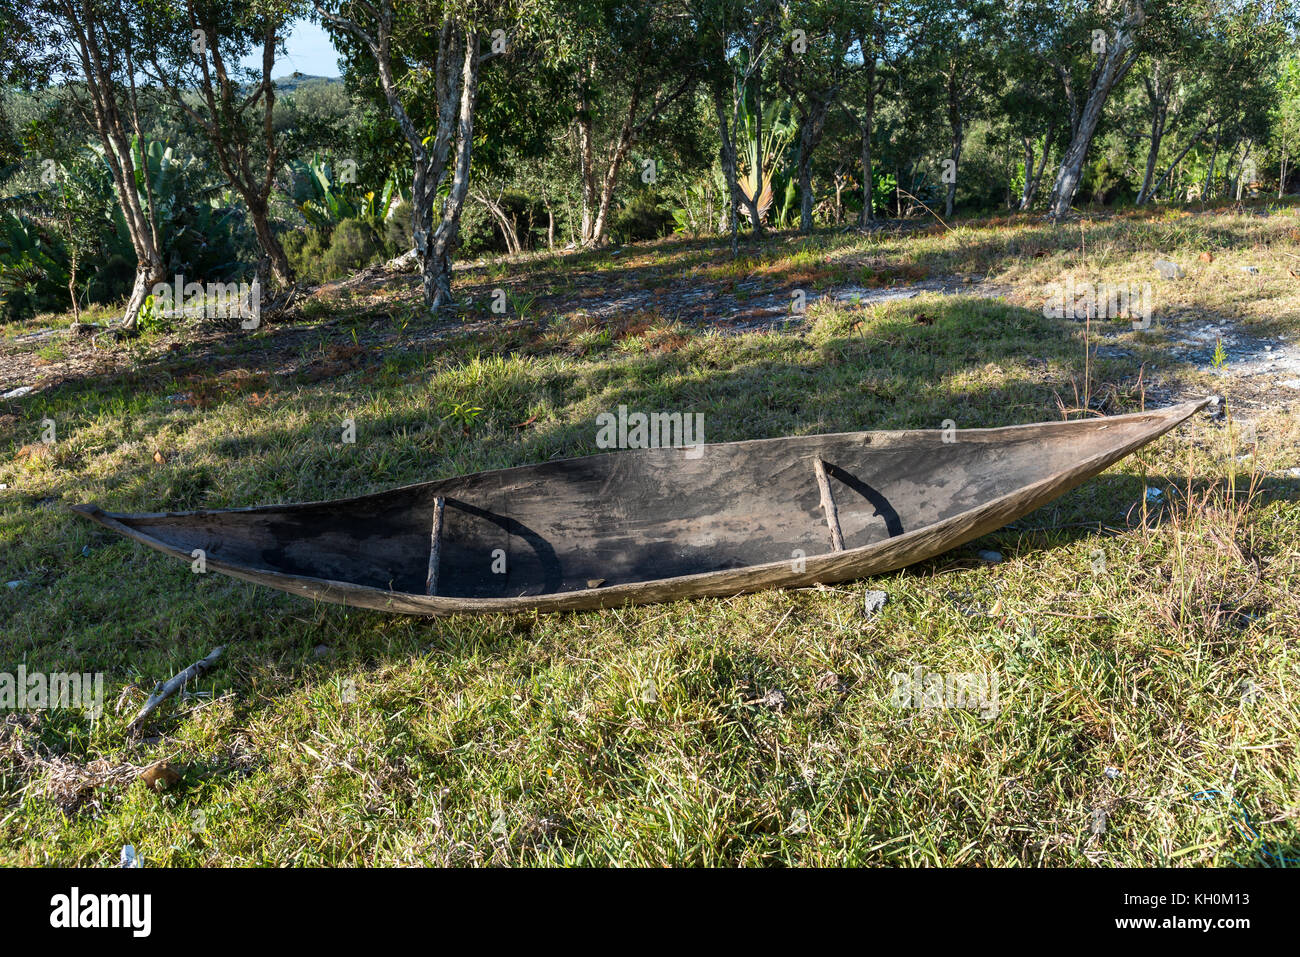 A dugout canoe used by local Malagasy people. Madagascar, Africa Stock Photo